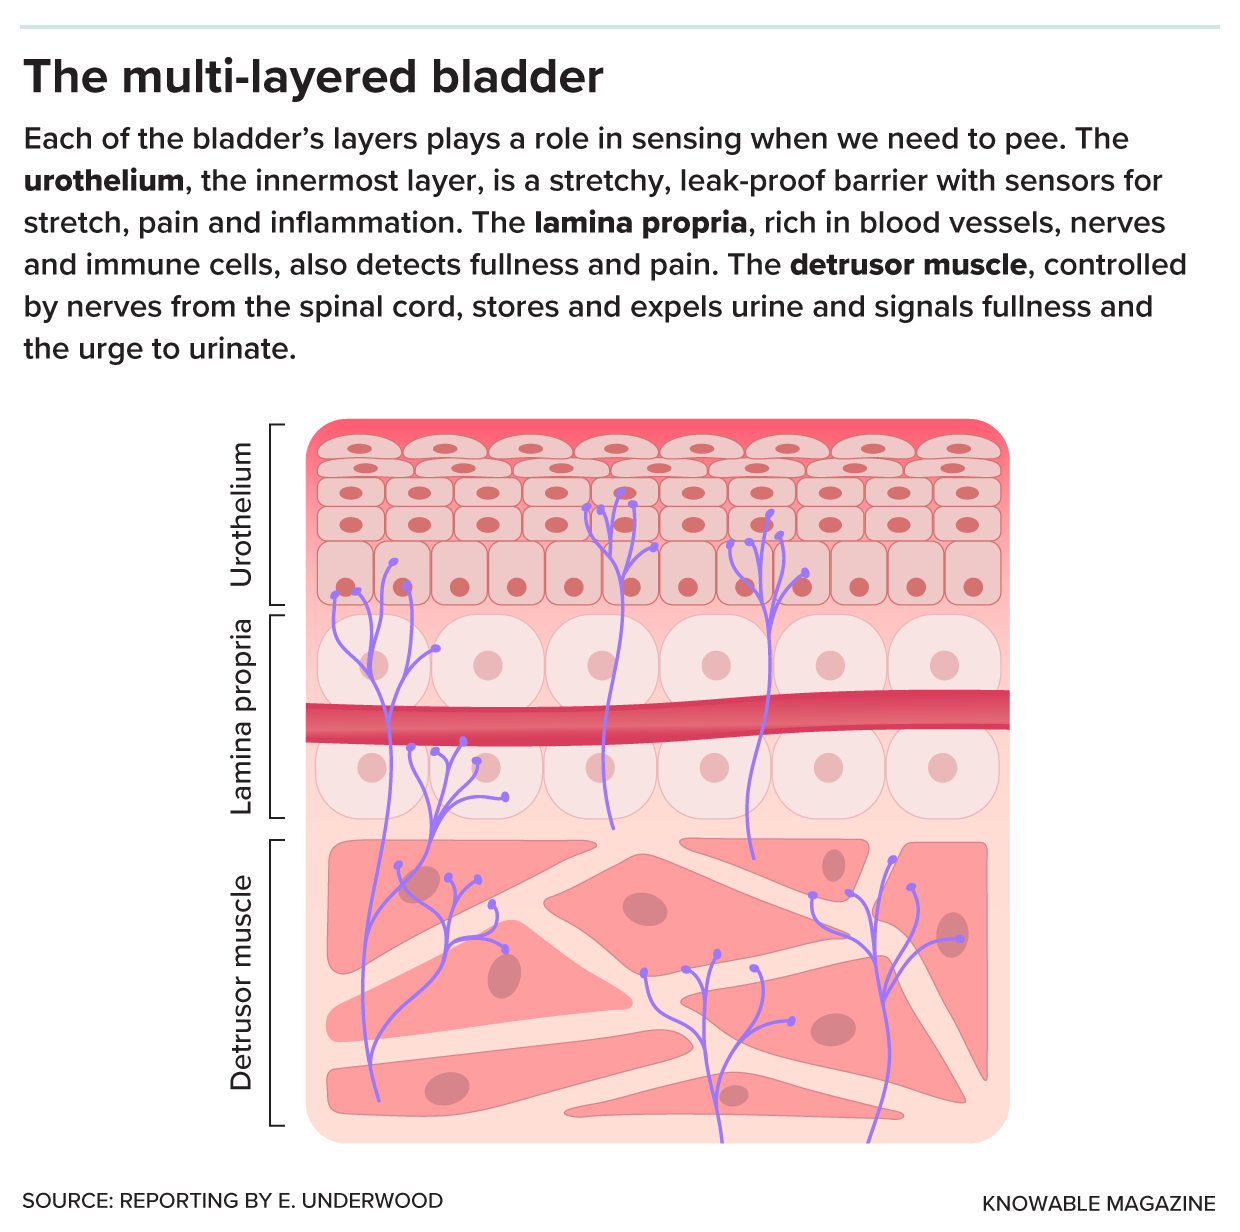 The bladder wall’s three main layers. Shown top to bottom from the inside out: the urothelium, lamina propria and detrusor muscle.